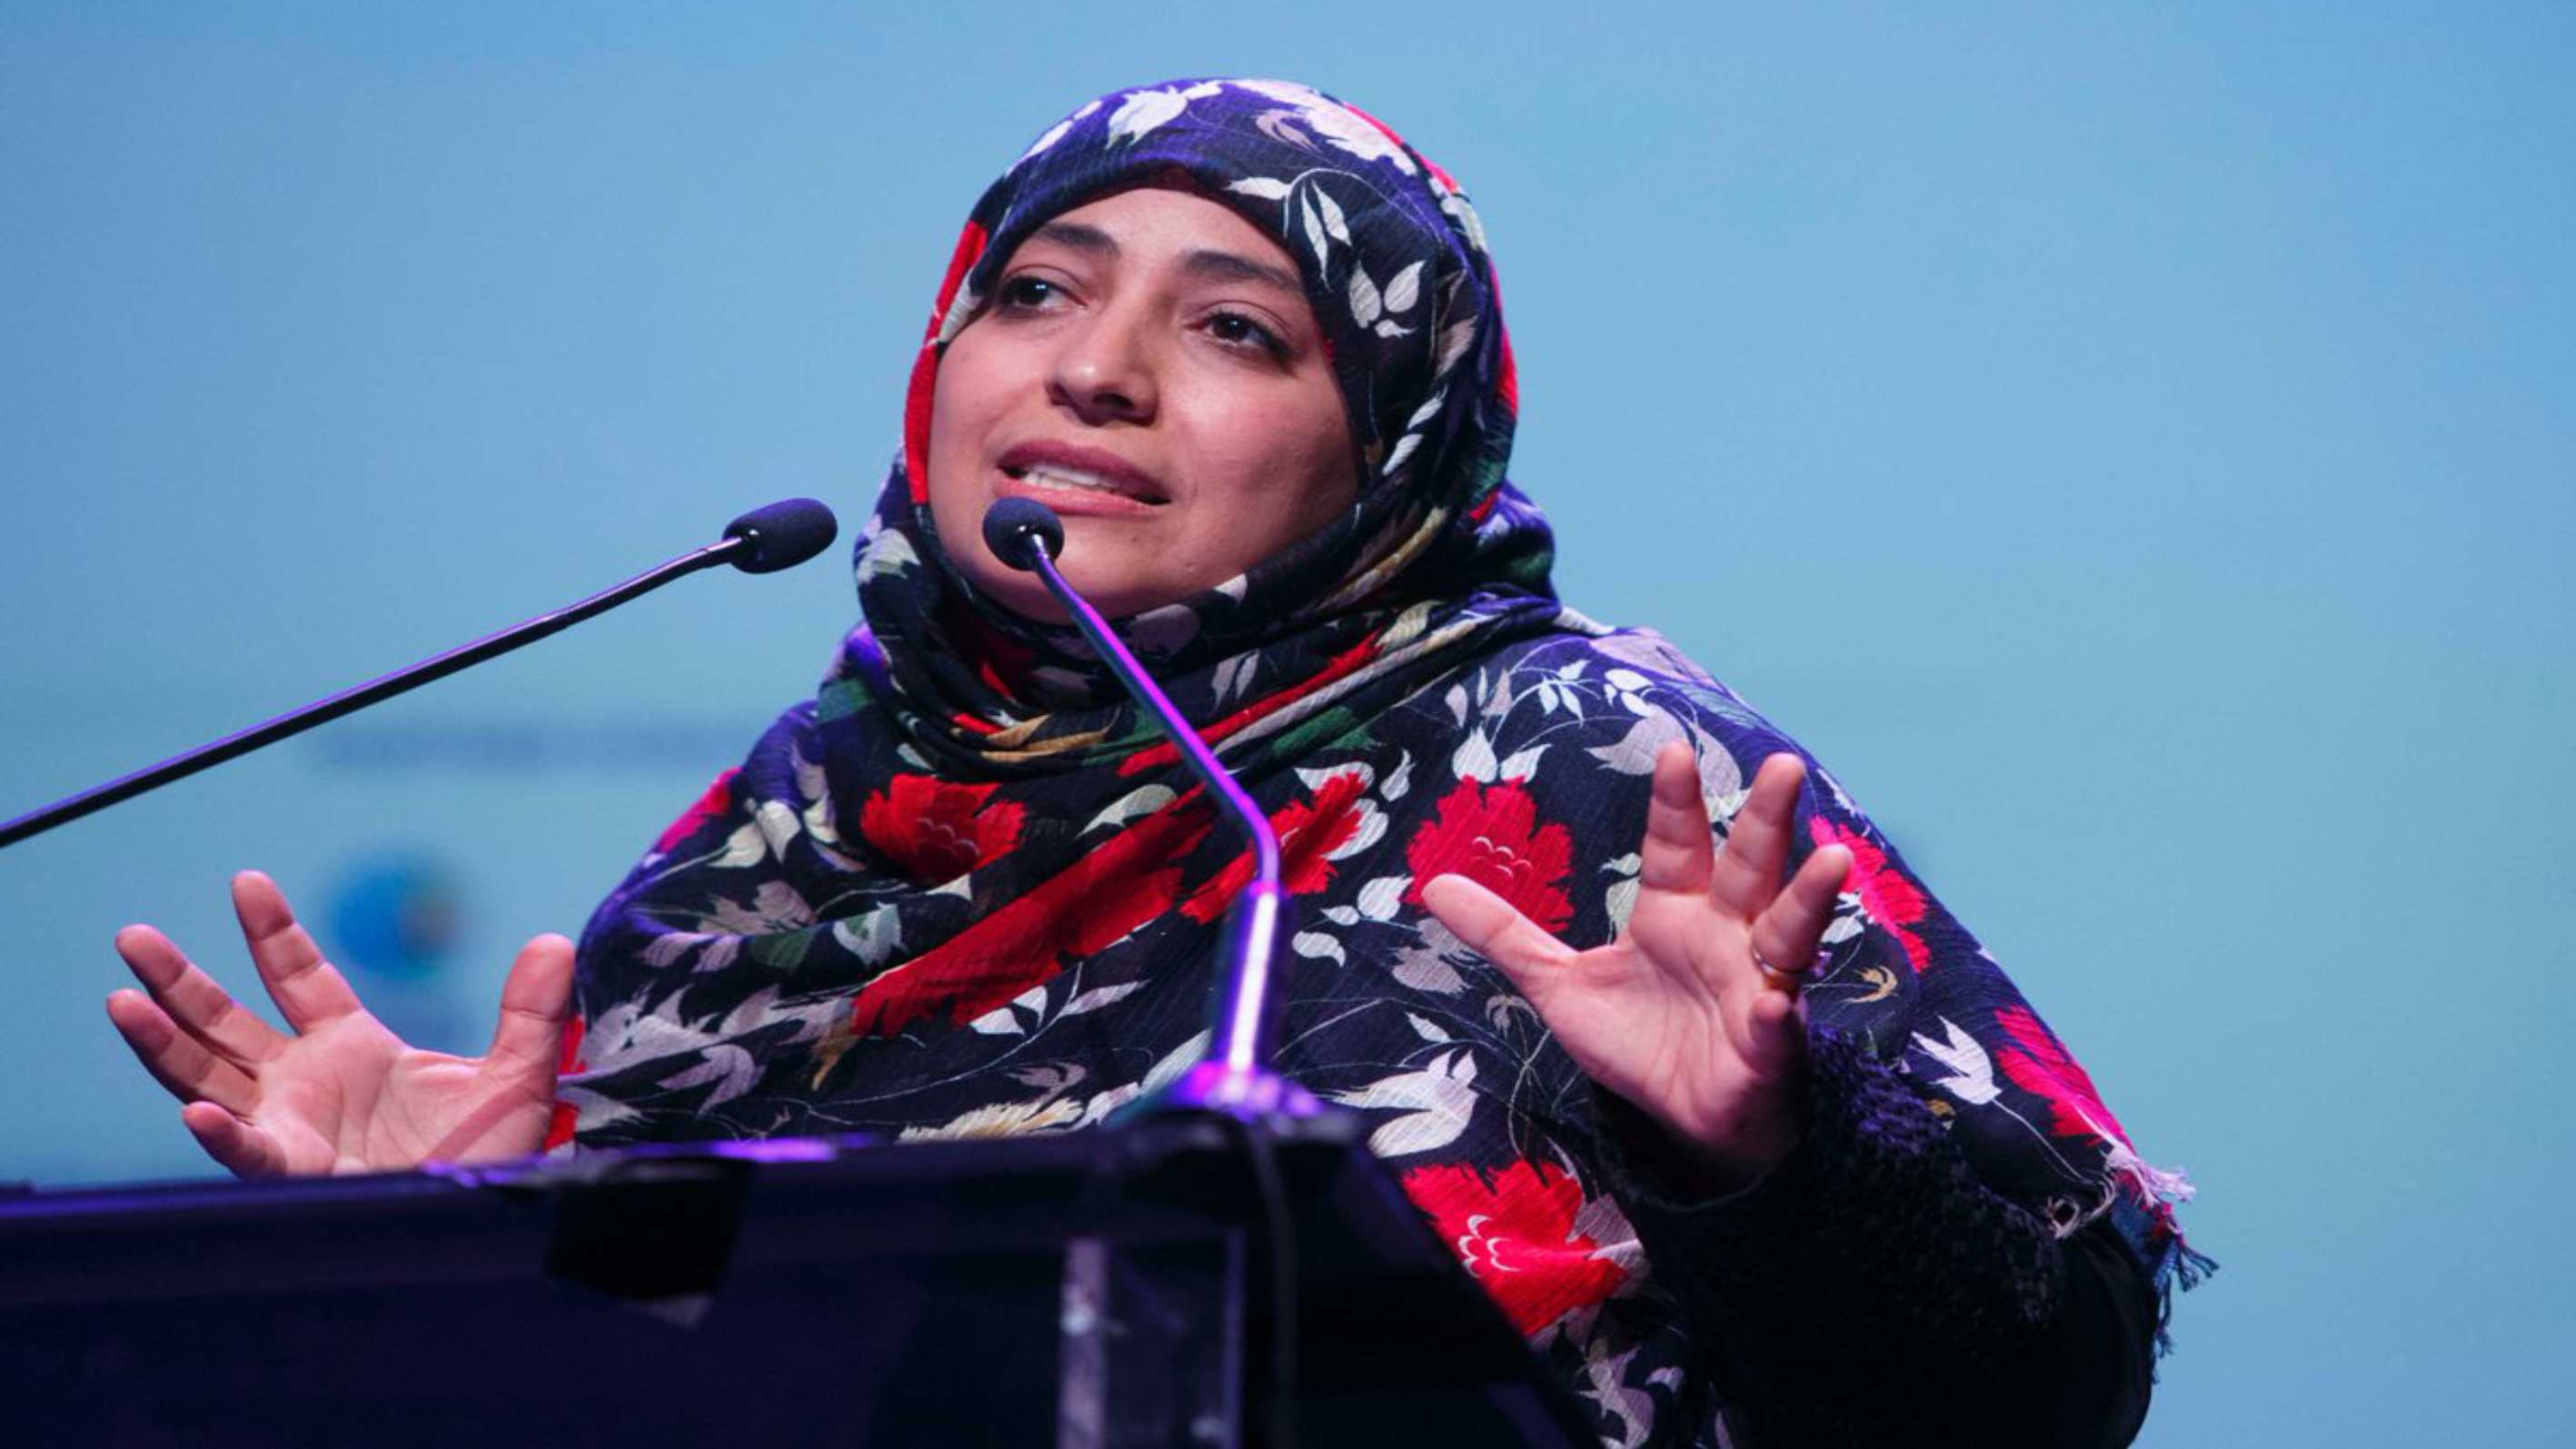 Mrs. Tawakkol Karman’s Speech in National Geographic Science Festival, Human rights activists in hostile environments, in Rome